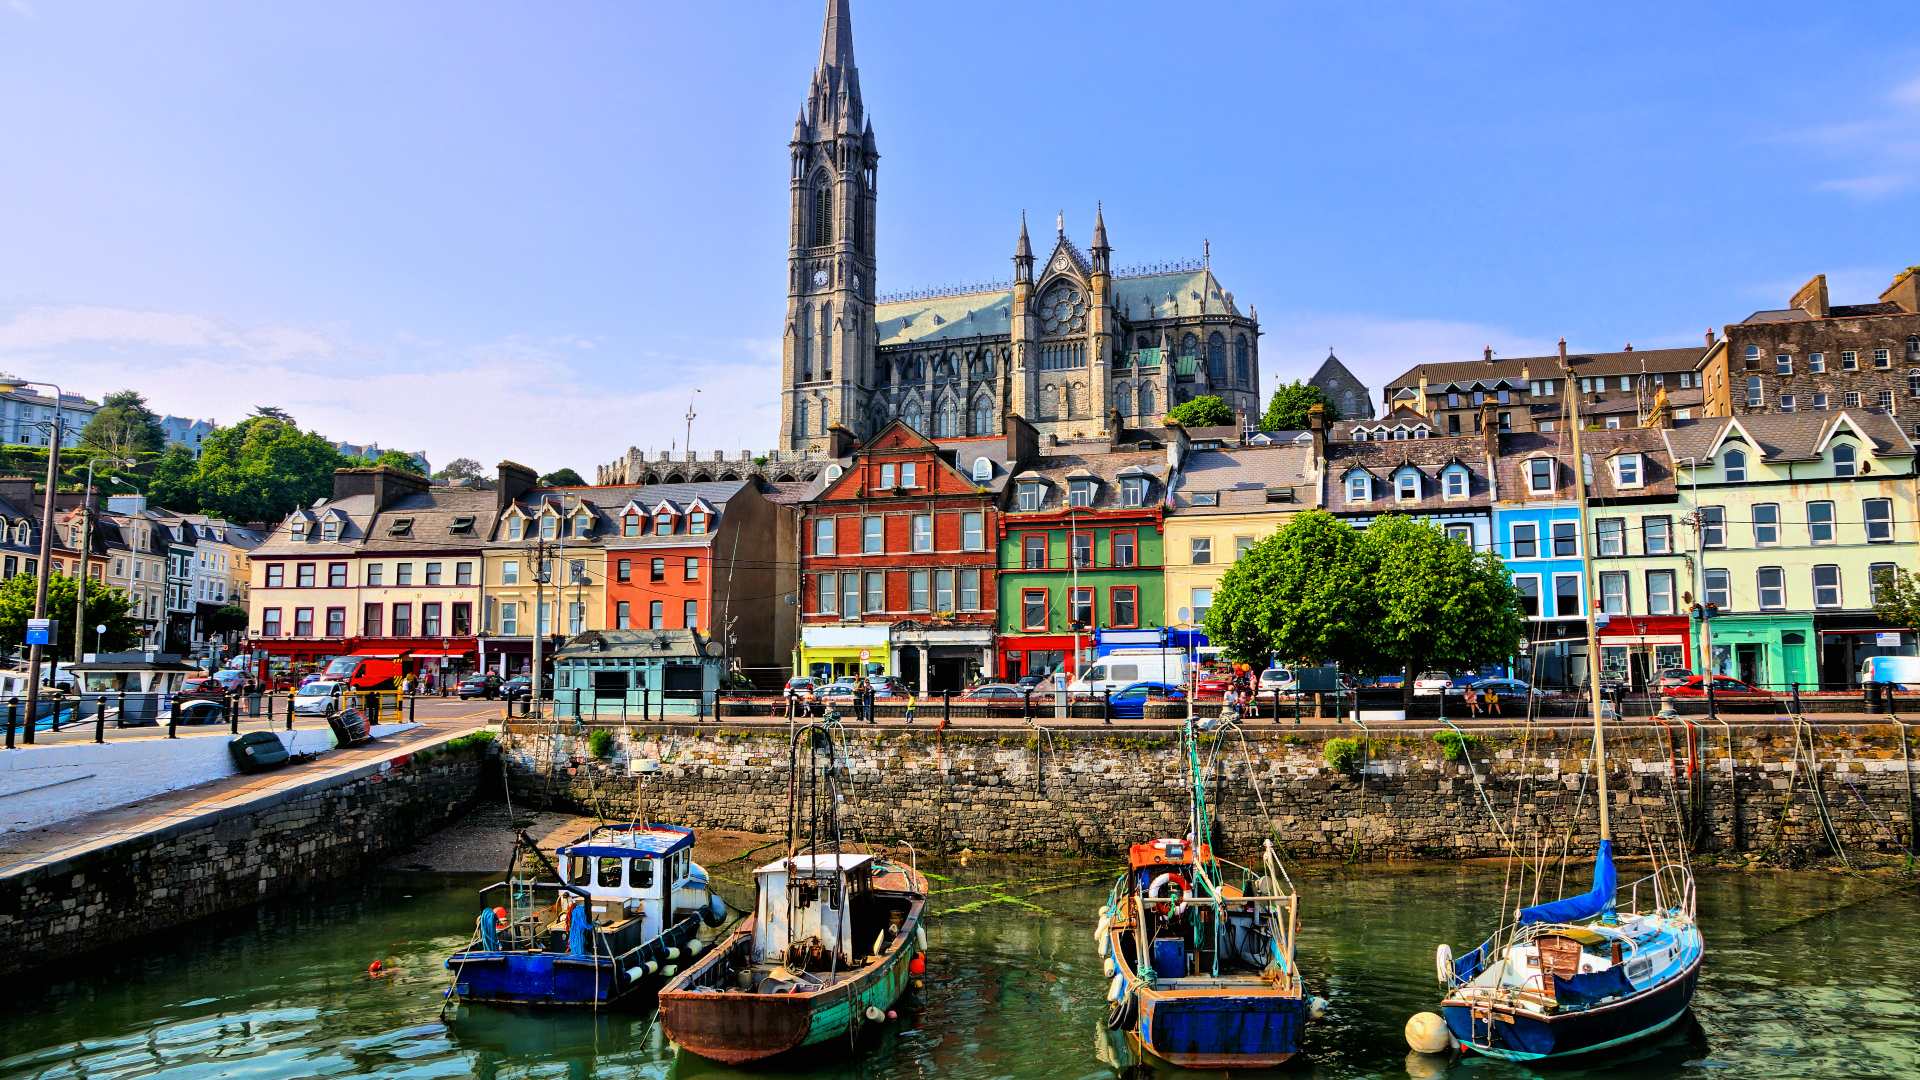 Colourful buildings and old boats in the harbour of Cobh, County Cork